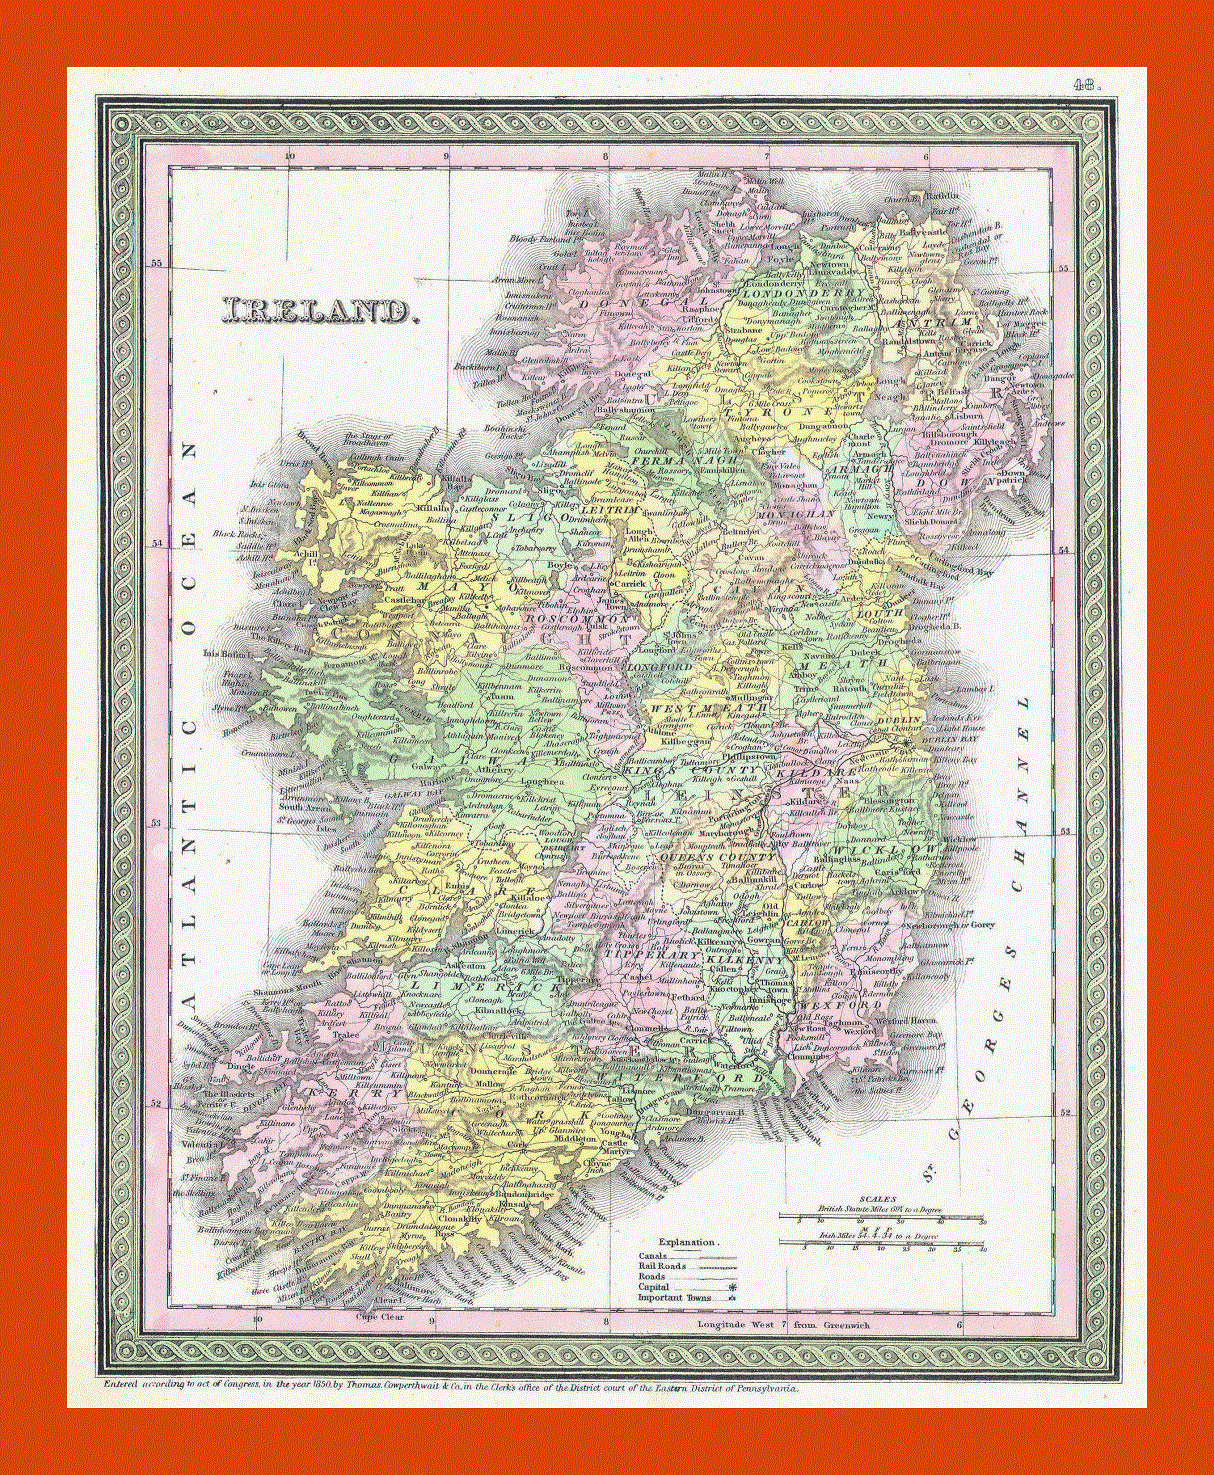 Old political and administrative map of Ireland - 1850